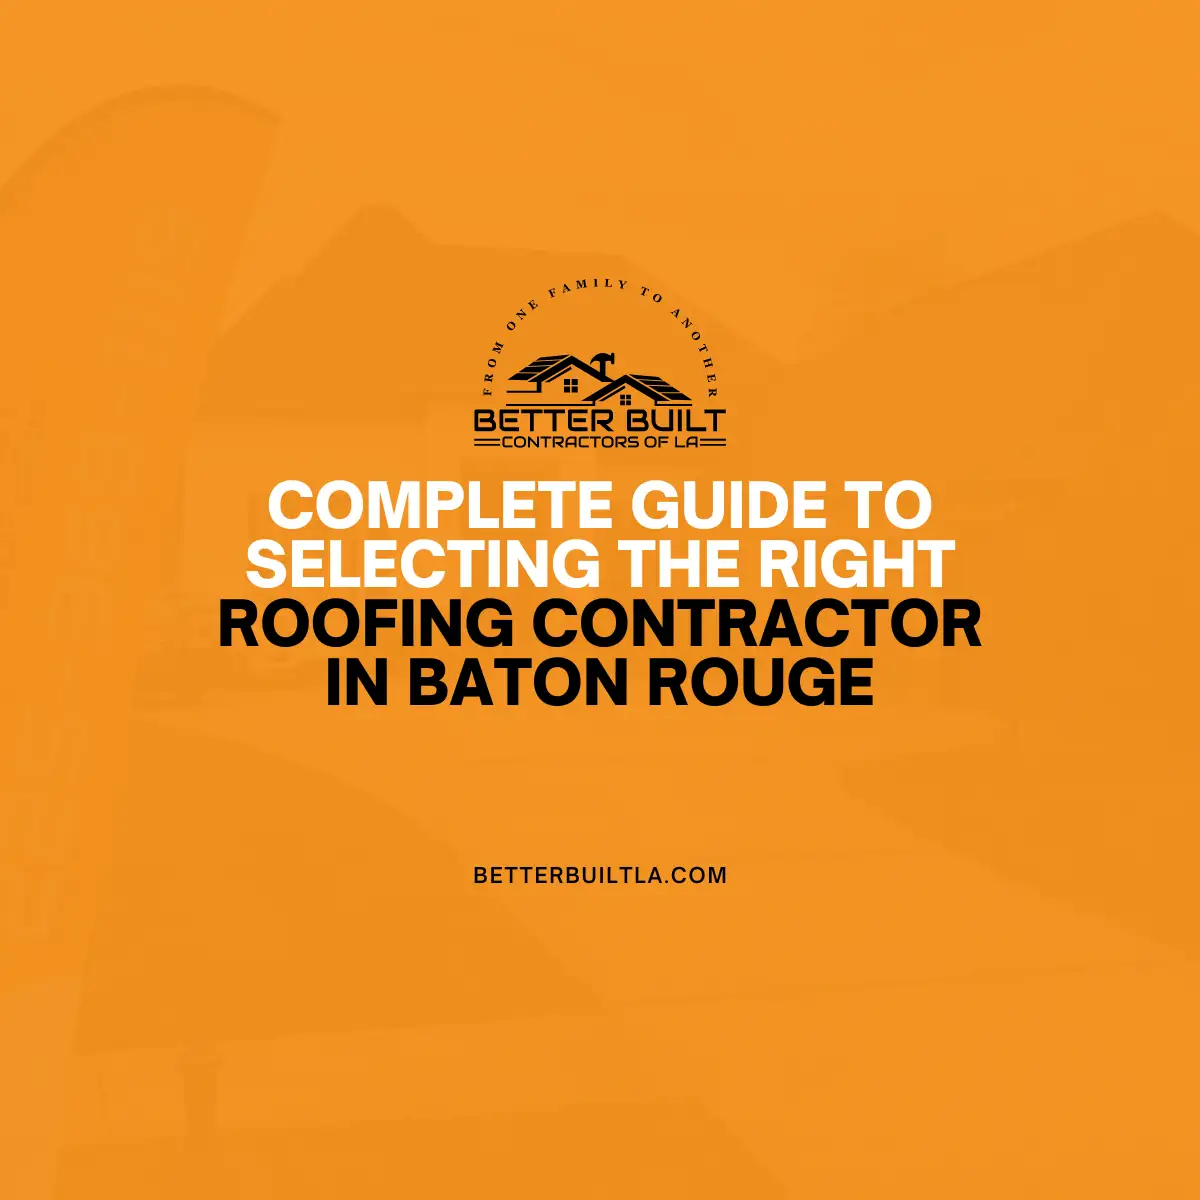 Complete Guide to Selecting the Right Roofing Contractor in Baton Rouge